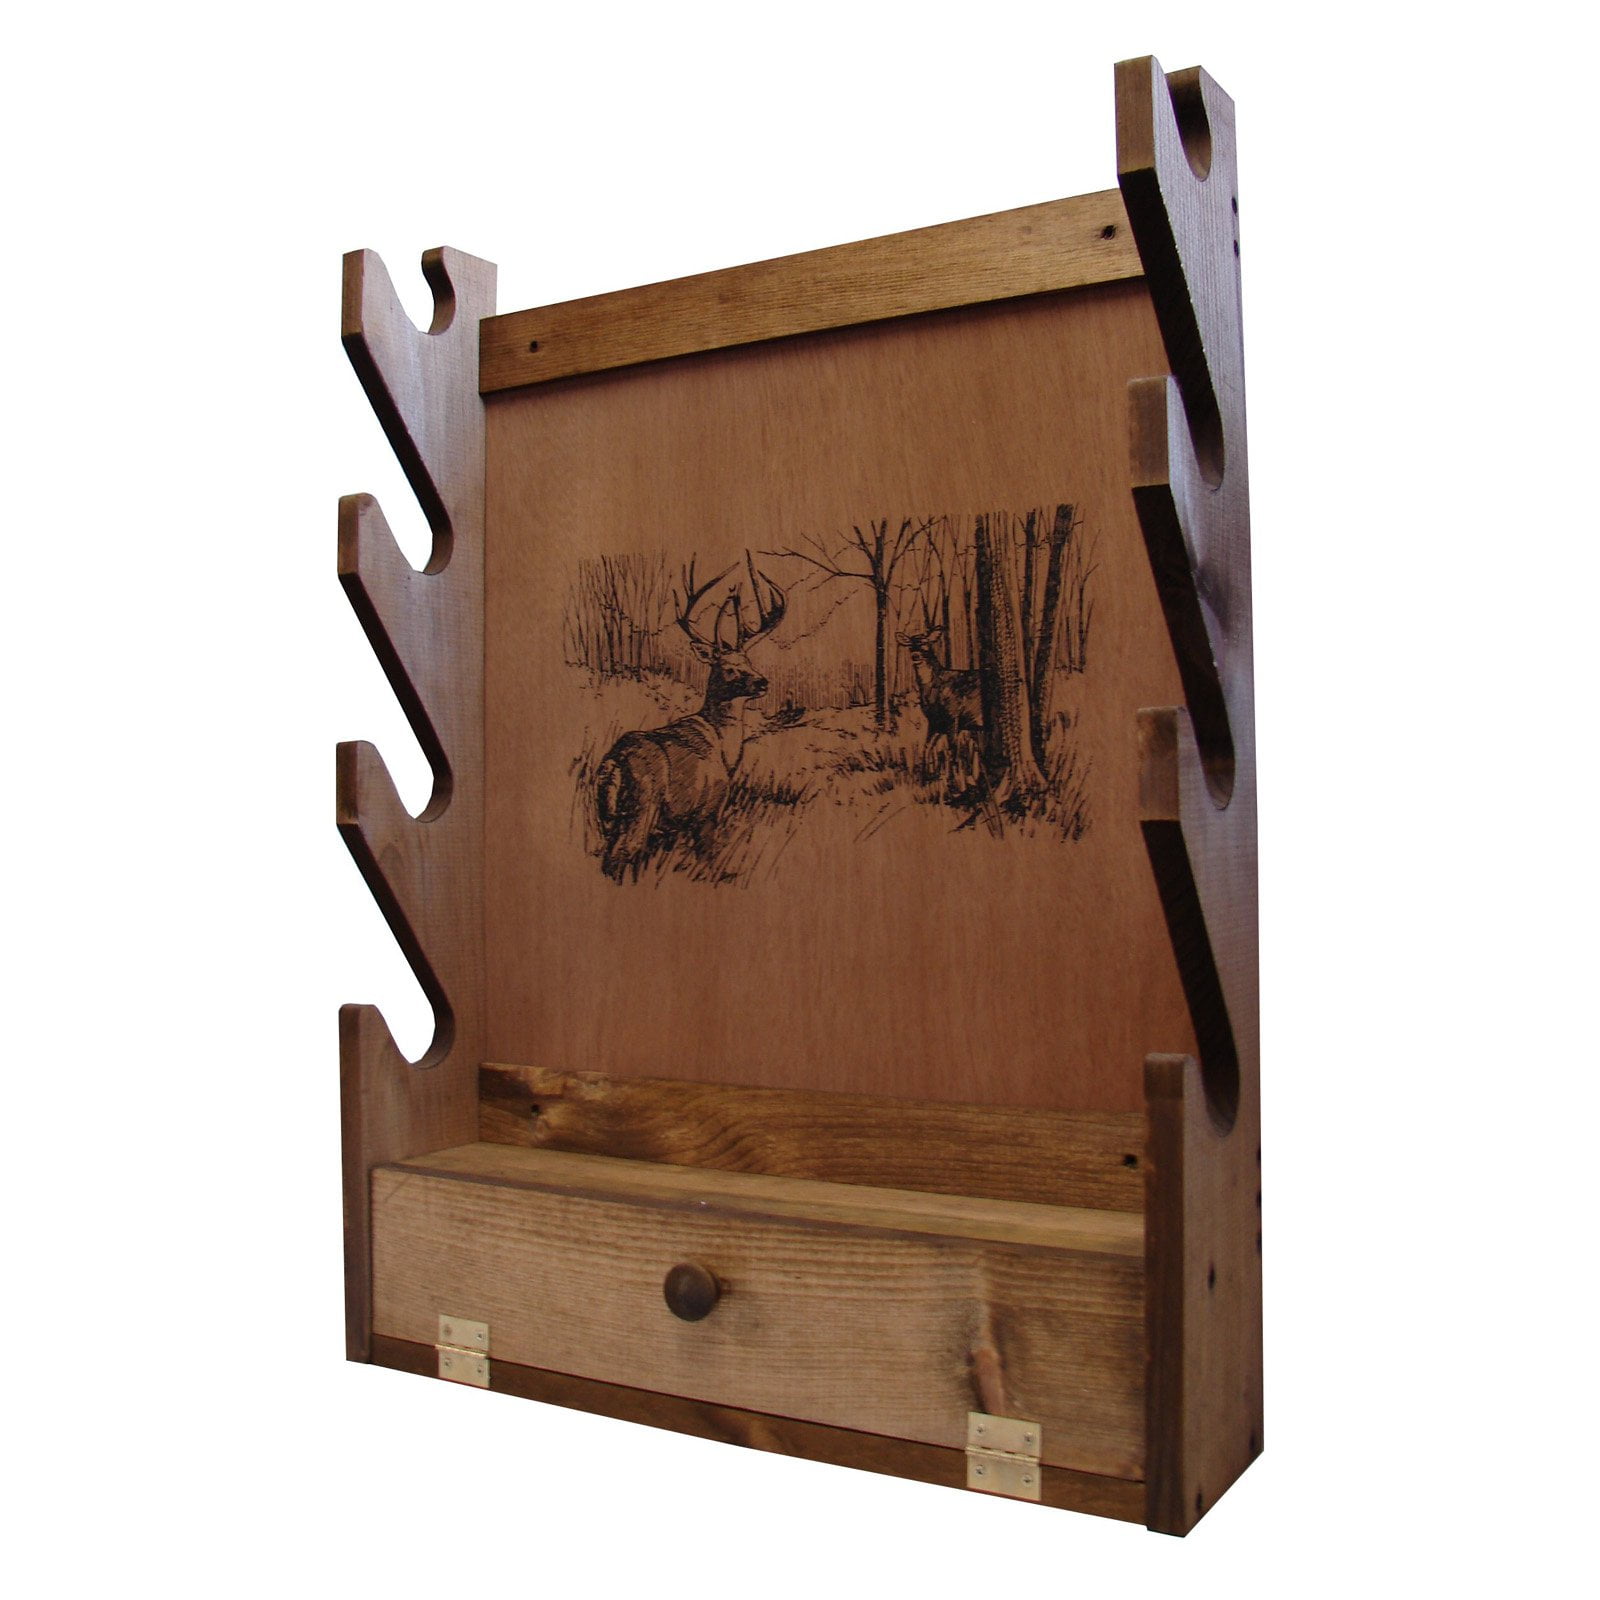 WOODEN WALL MOUNT SINGLE GUN RACK WITH A CHILD SAFETY LOCK FOR A SHOTGUN-RIFLE 